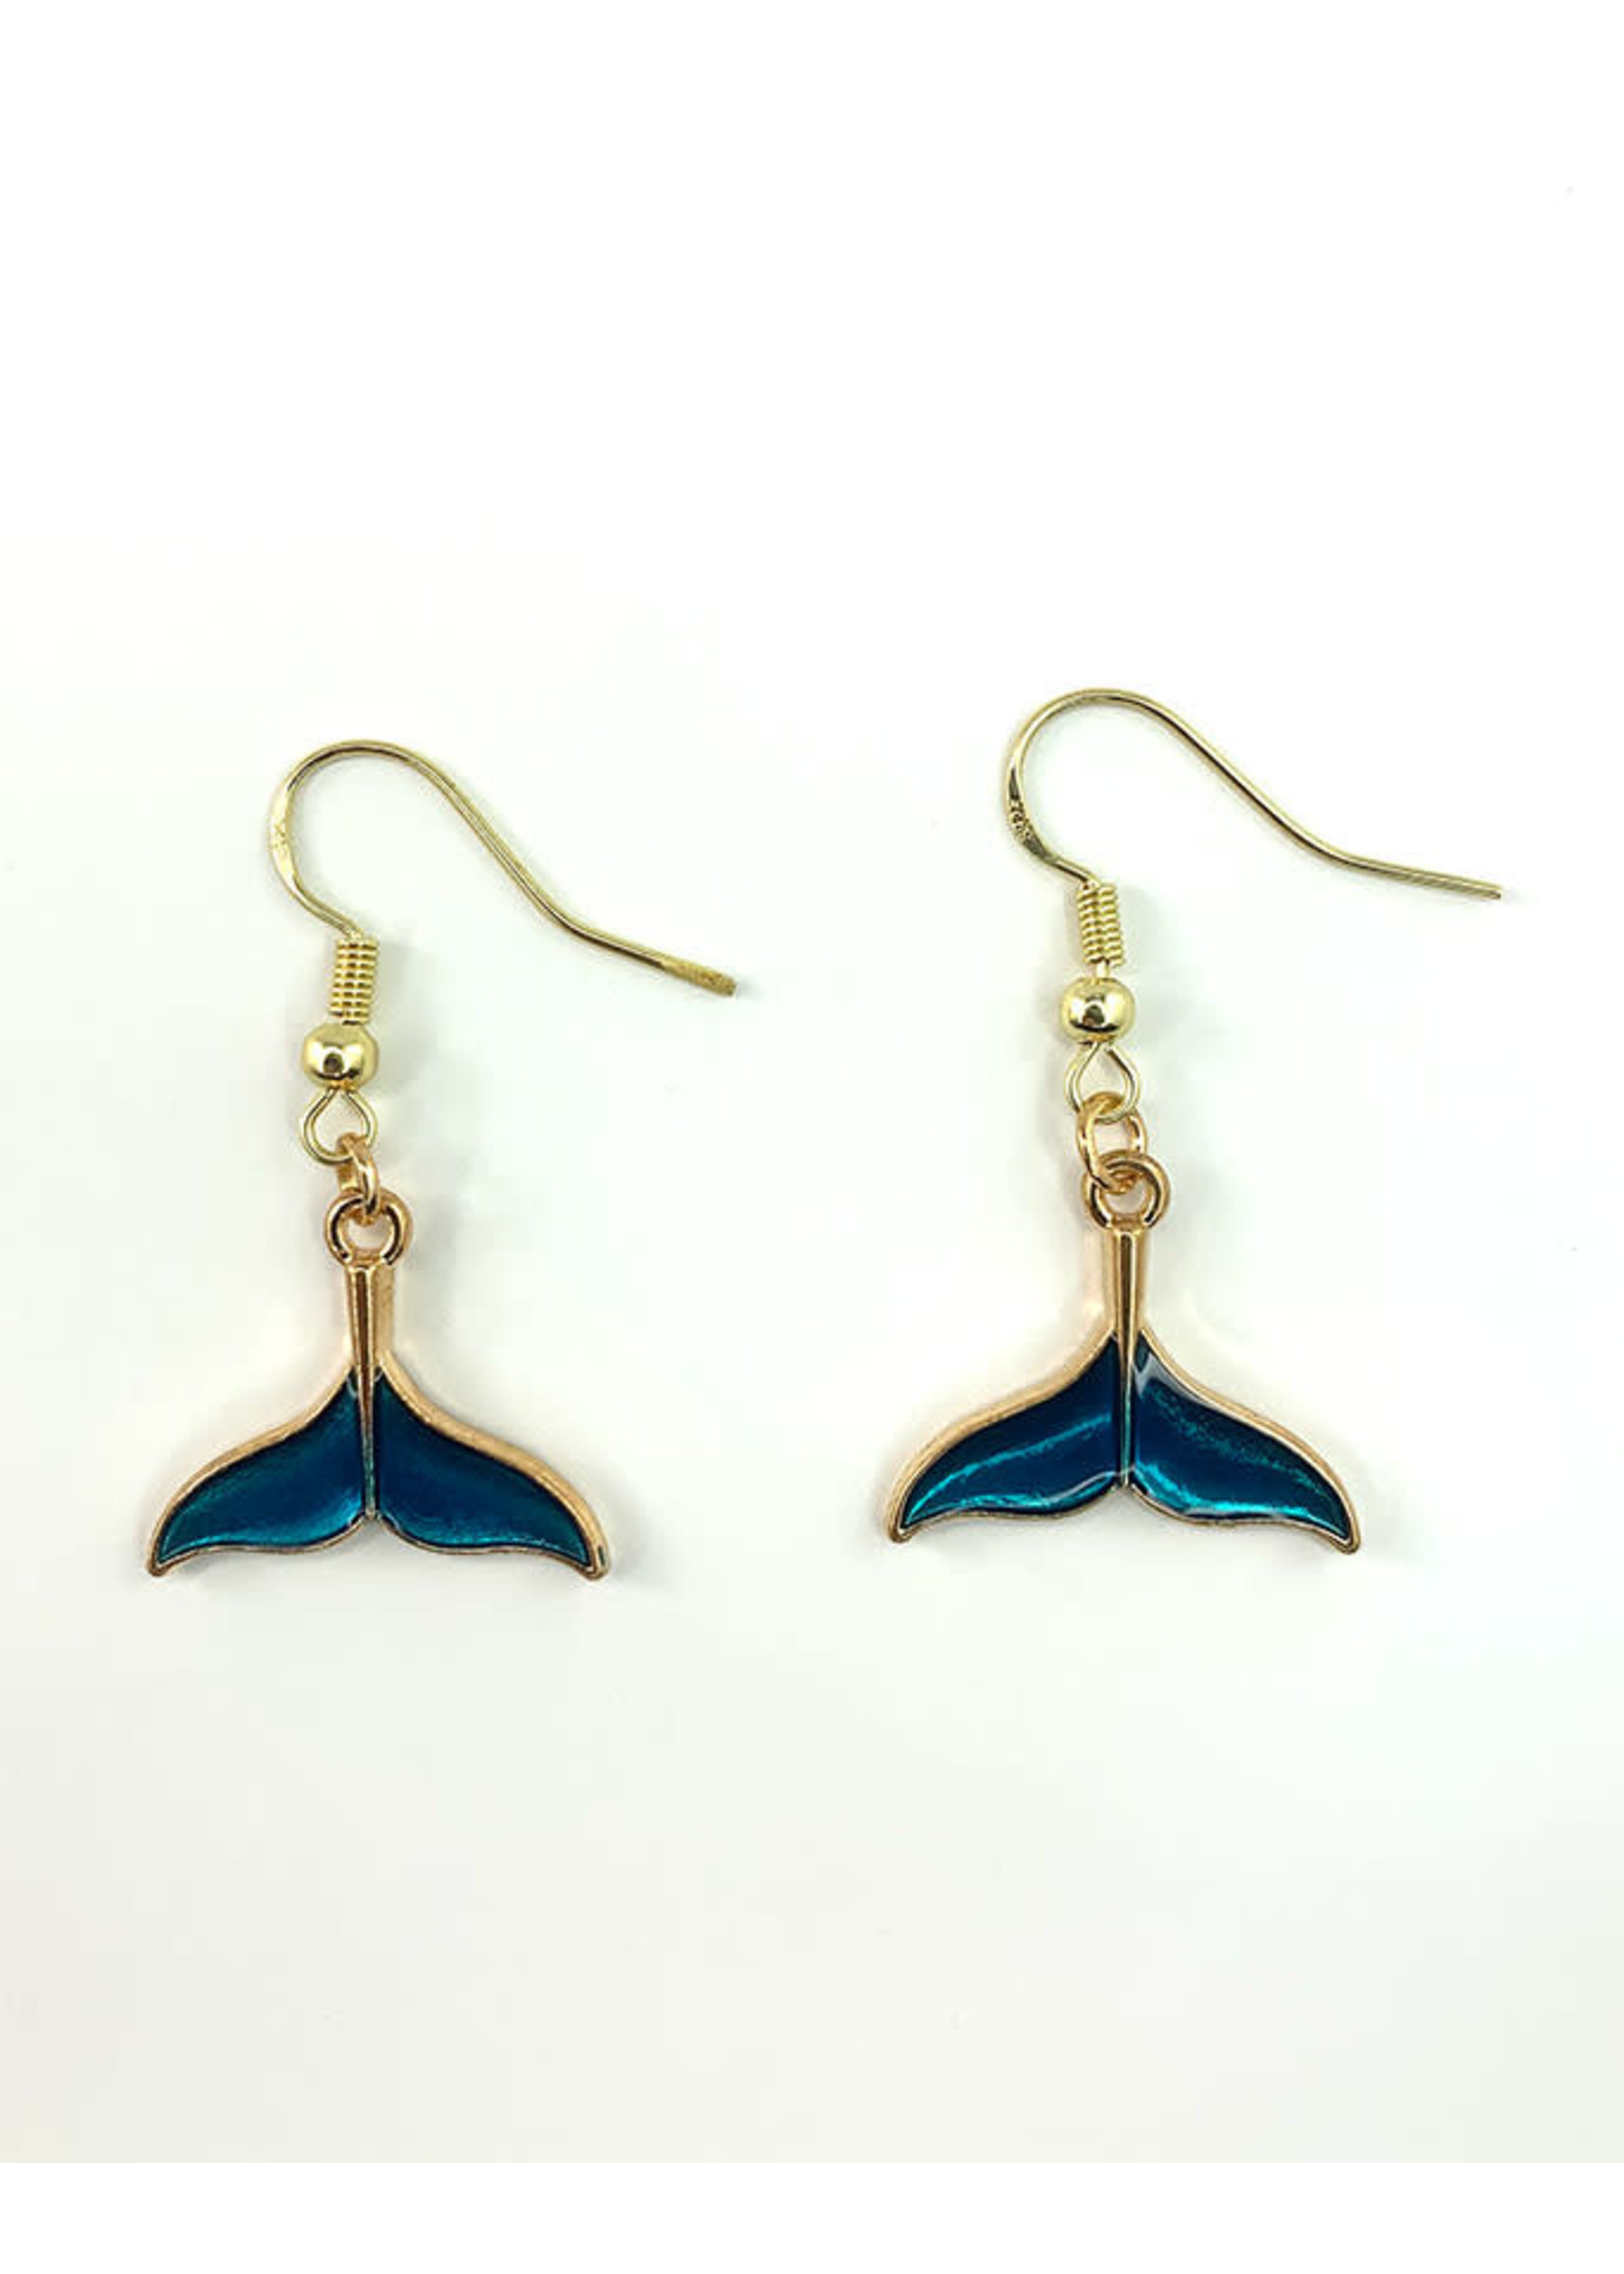 Earrings Whale Tail Blue and Gold